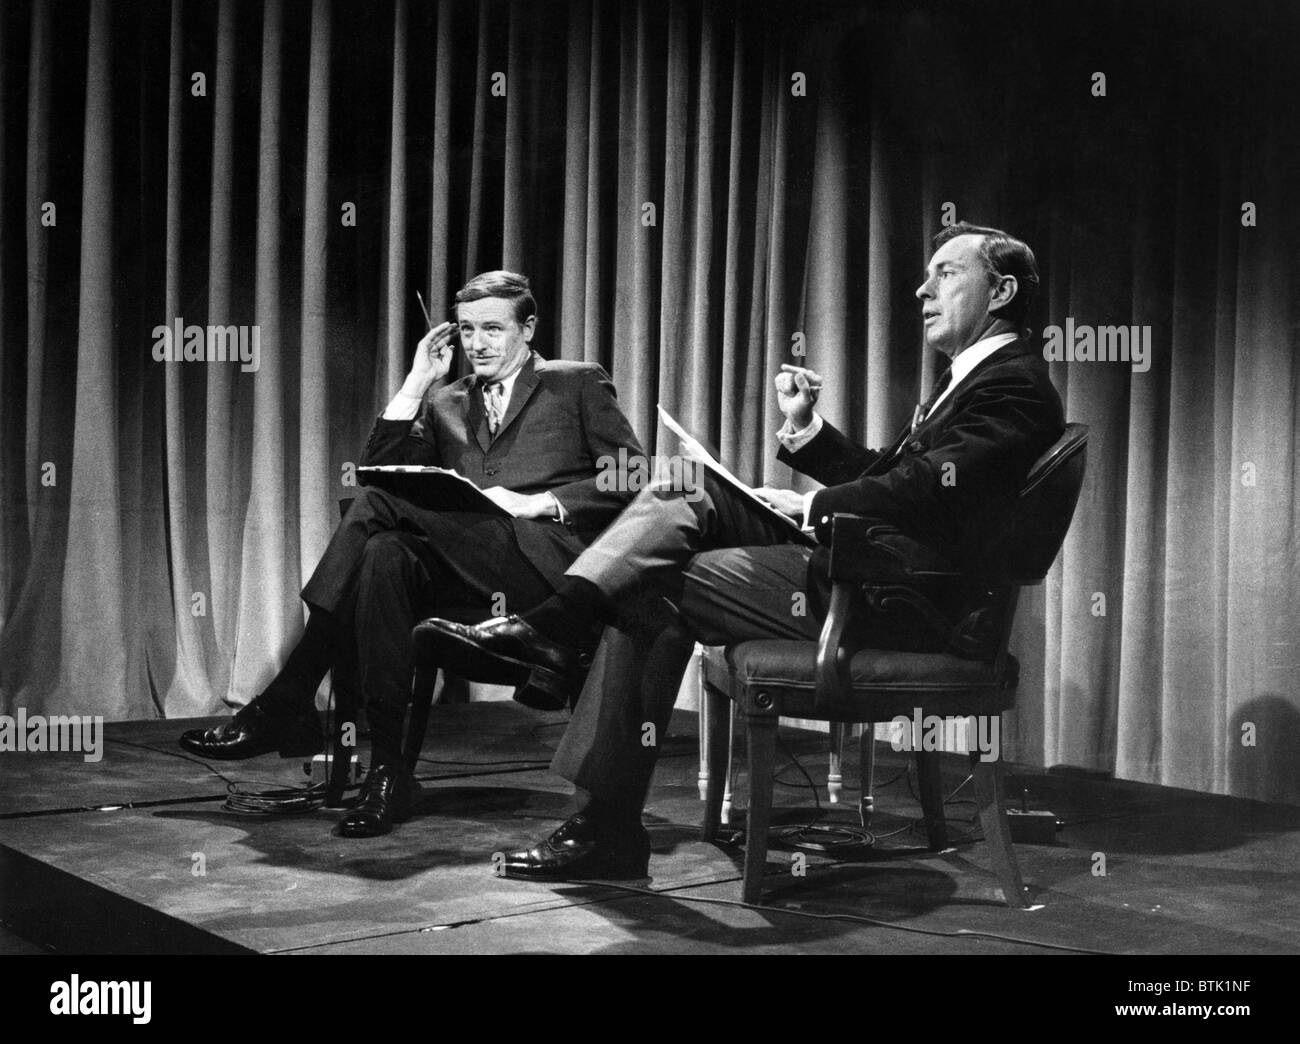 ELECTION NIGHT, guest commentators William F. Buckley and Gore Vidal, October 15, 1968. Stock Photo